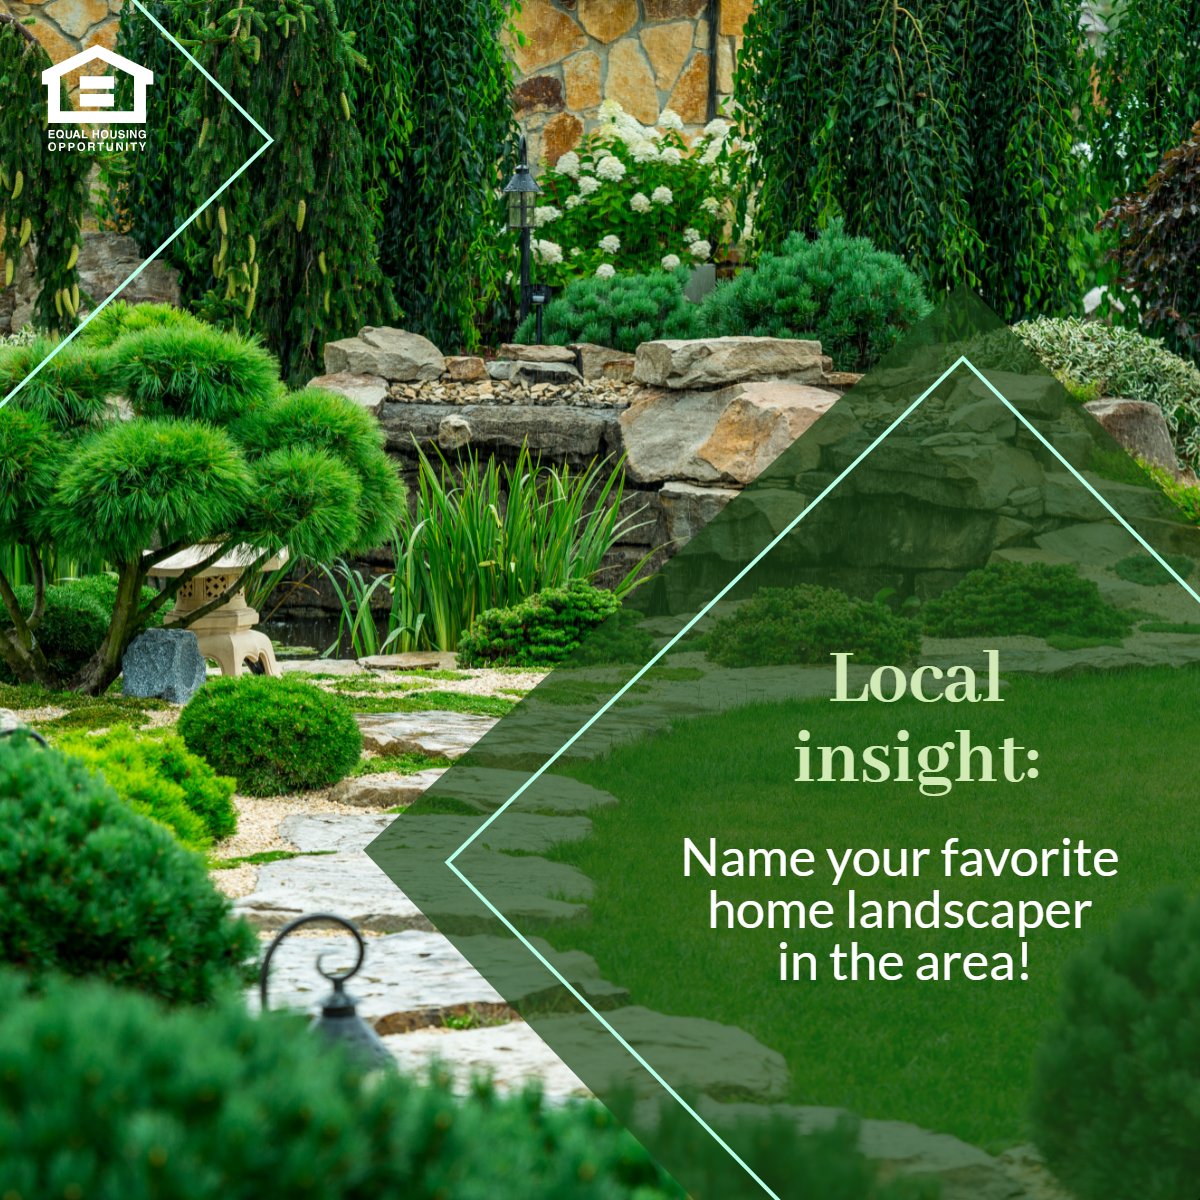 Good landscaping has several important functions and provides numerous benefits. 

Do you have any recommendations? 

Share them below!

#HomeGoals #HomeImprovement
 #Realestate #Brokerlife #Marketupdate #thevisiongroup #thevisiongroupres #realtor #Orangecounty